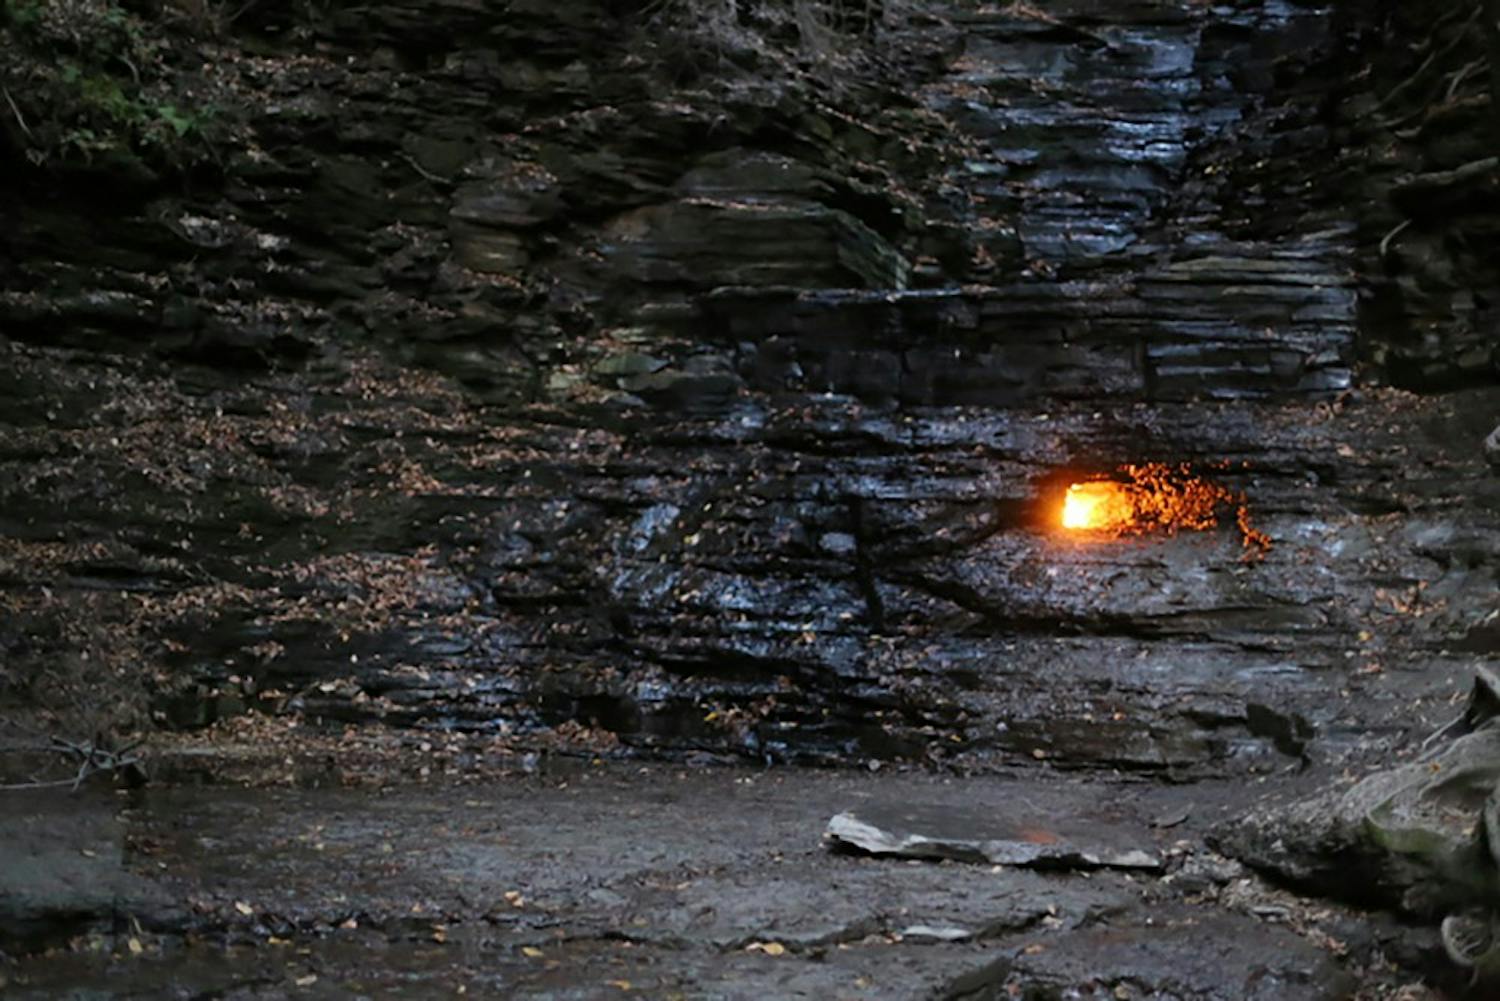 The Eternal Flame trail in Chestnut Ridge Park is a great trail for beginner and experienced hikers. The natural gas that fuels the flame runs year-round, keeping the flame lit all day.